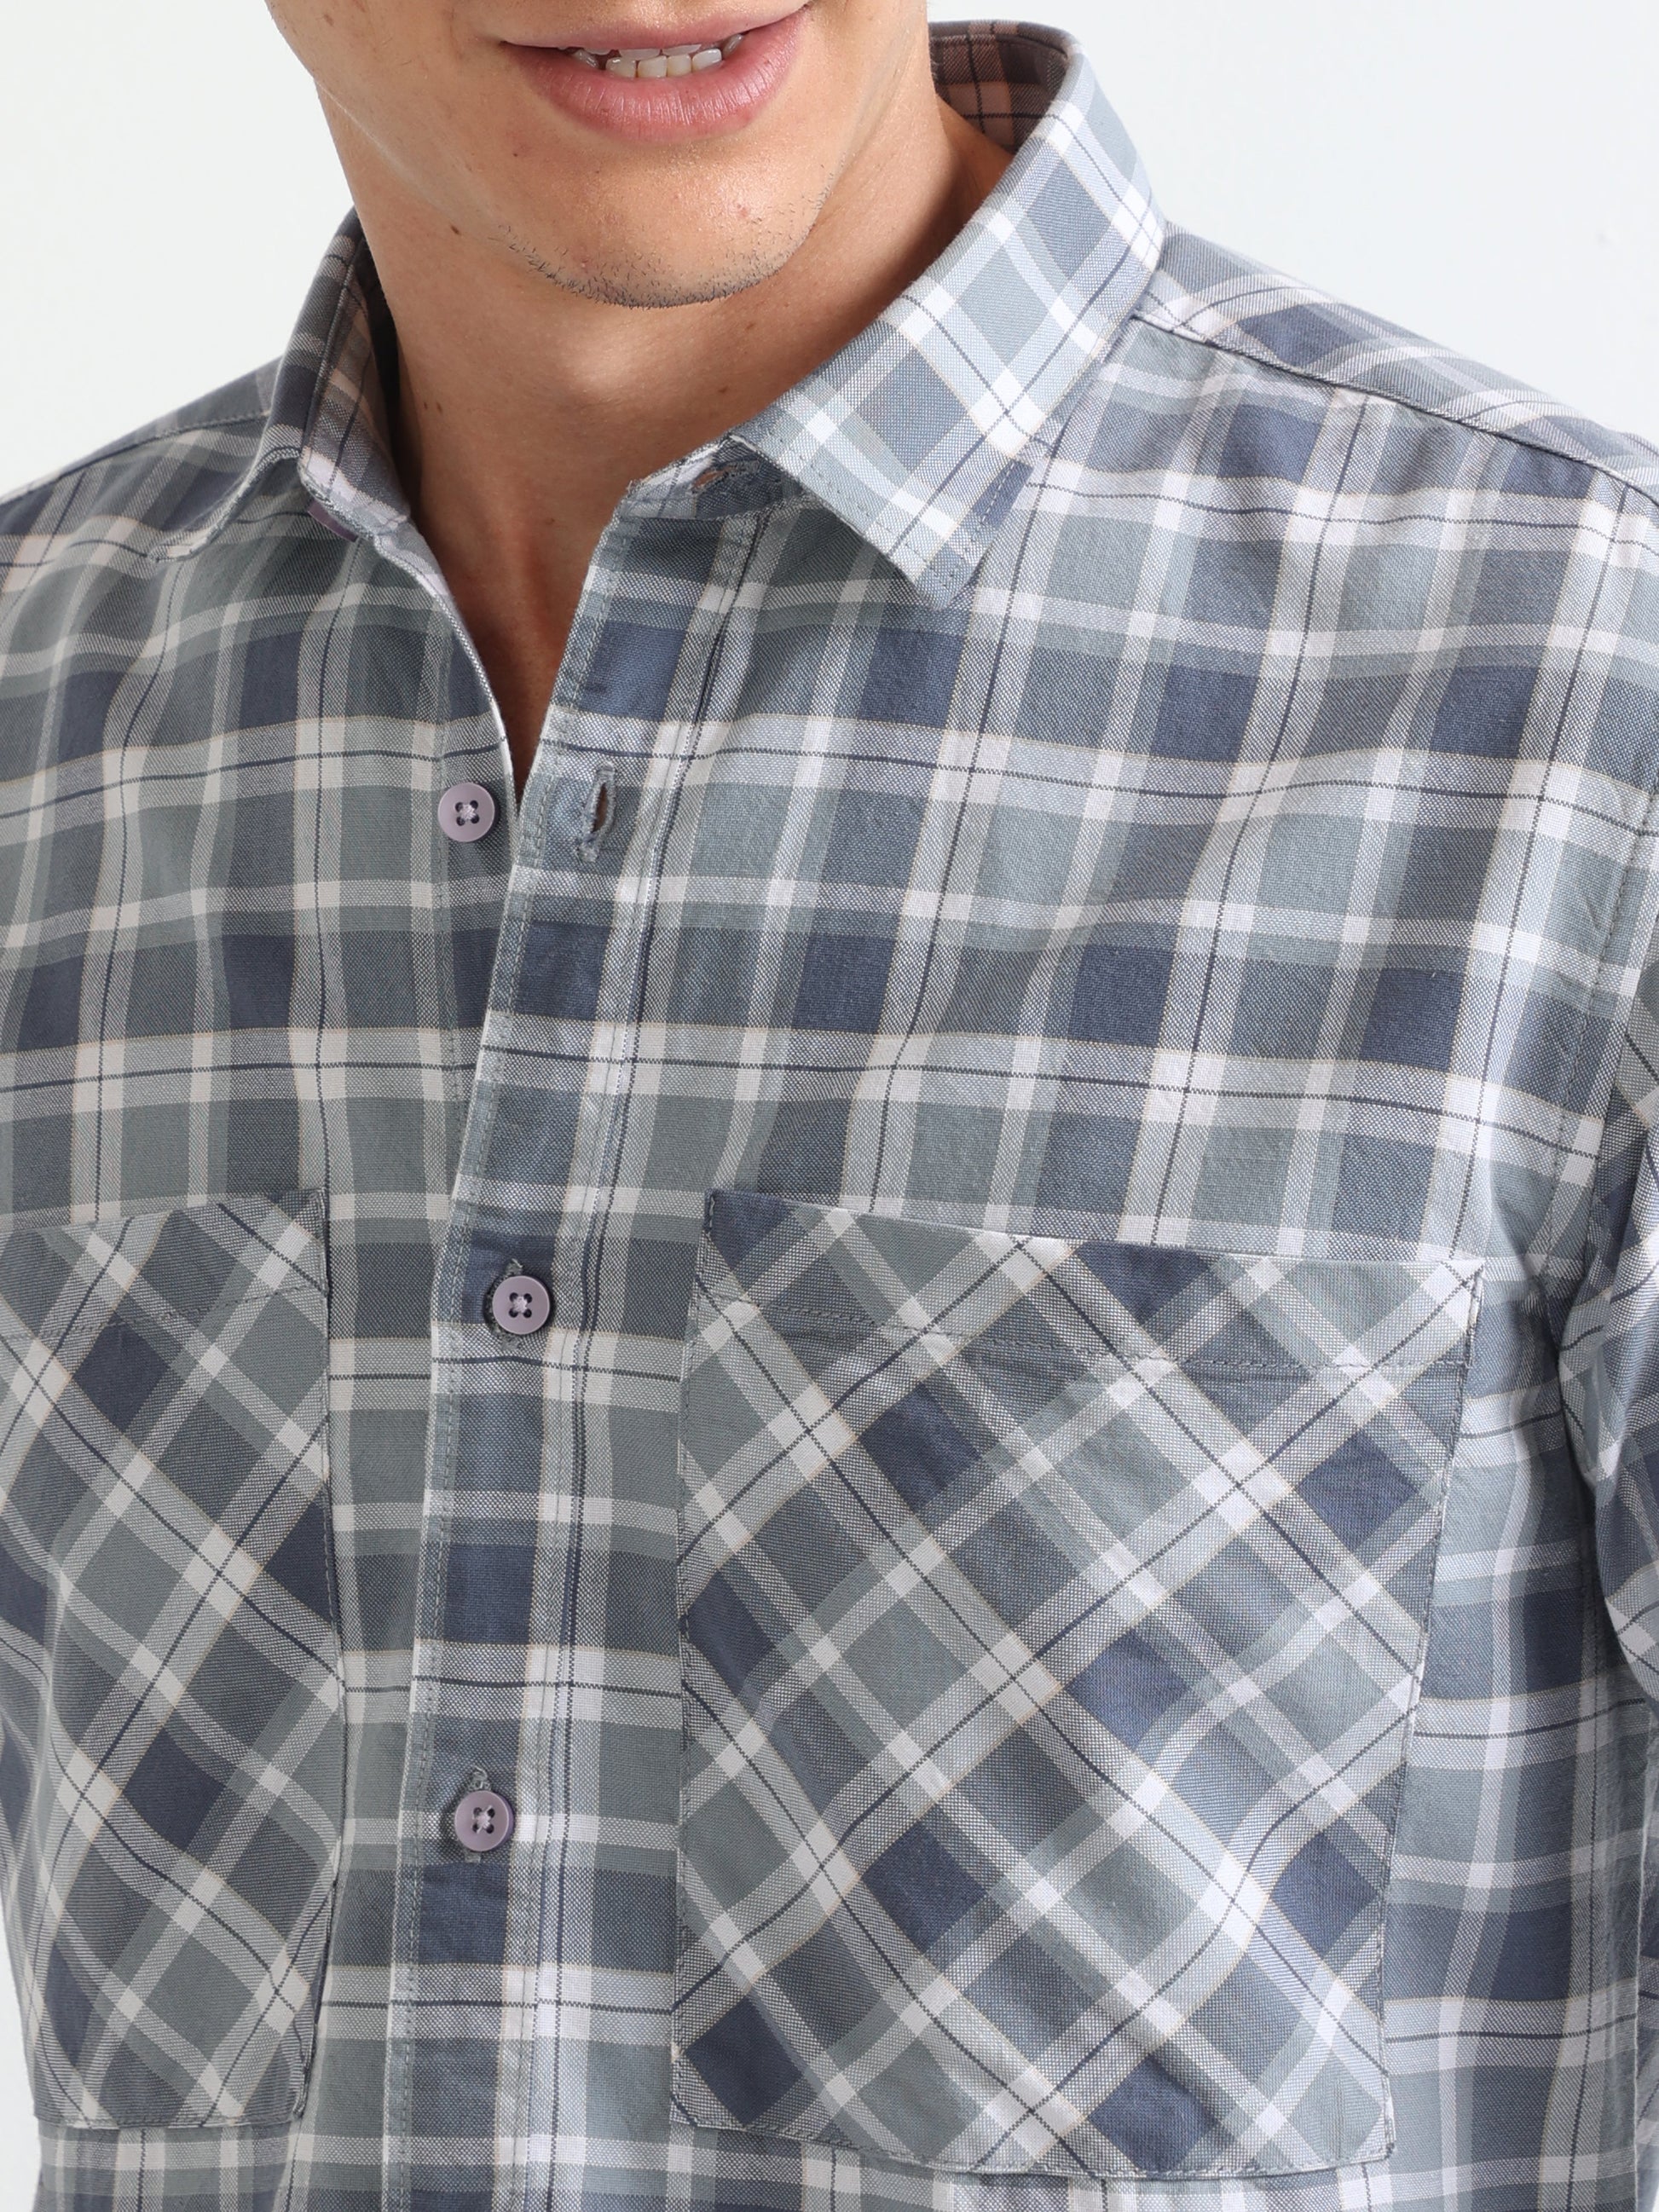 Buy Bia Double Pocket Oxford Shirt For Mens Online.